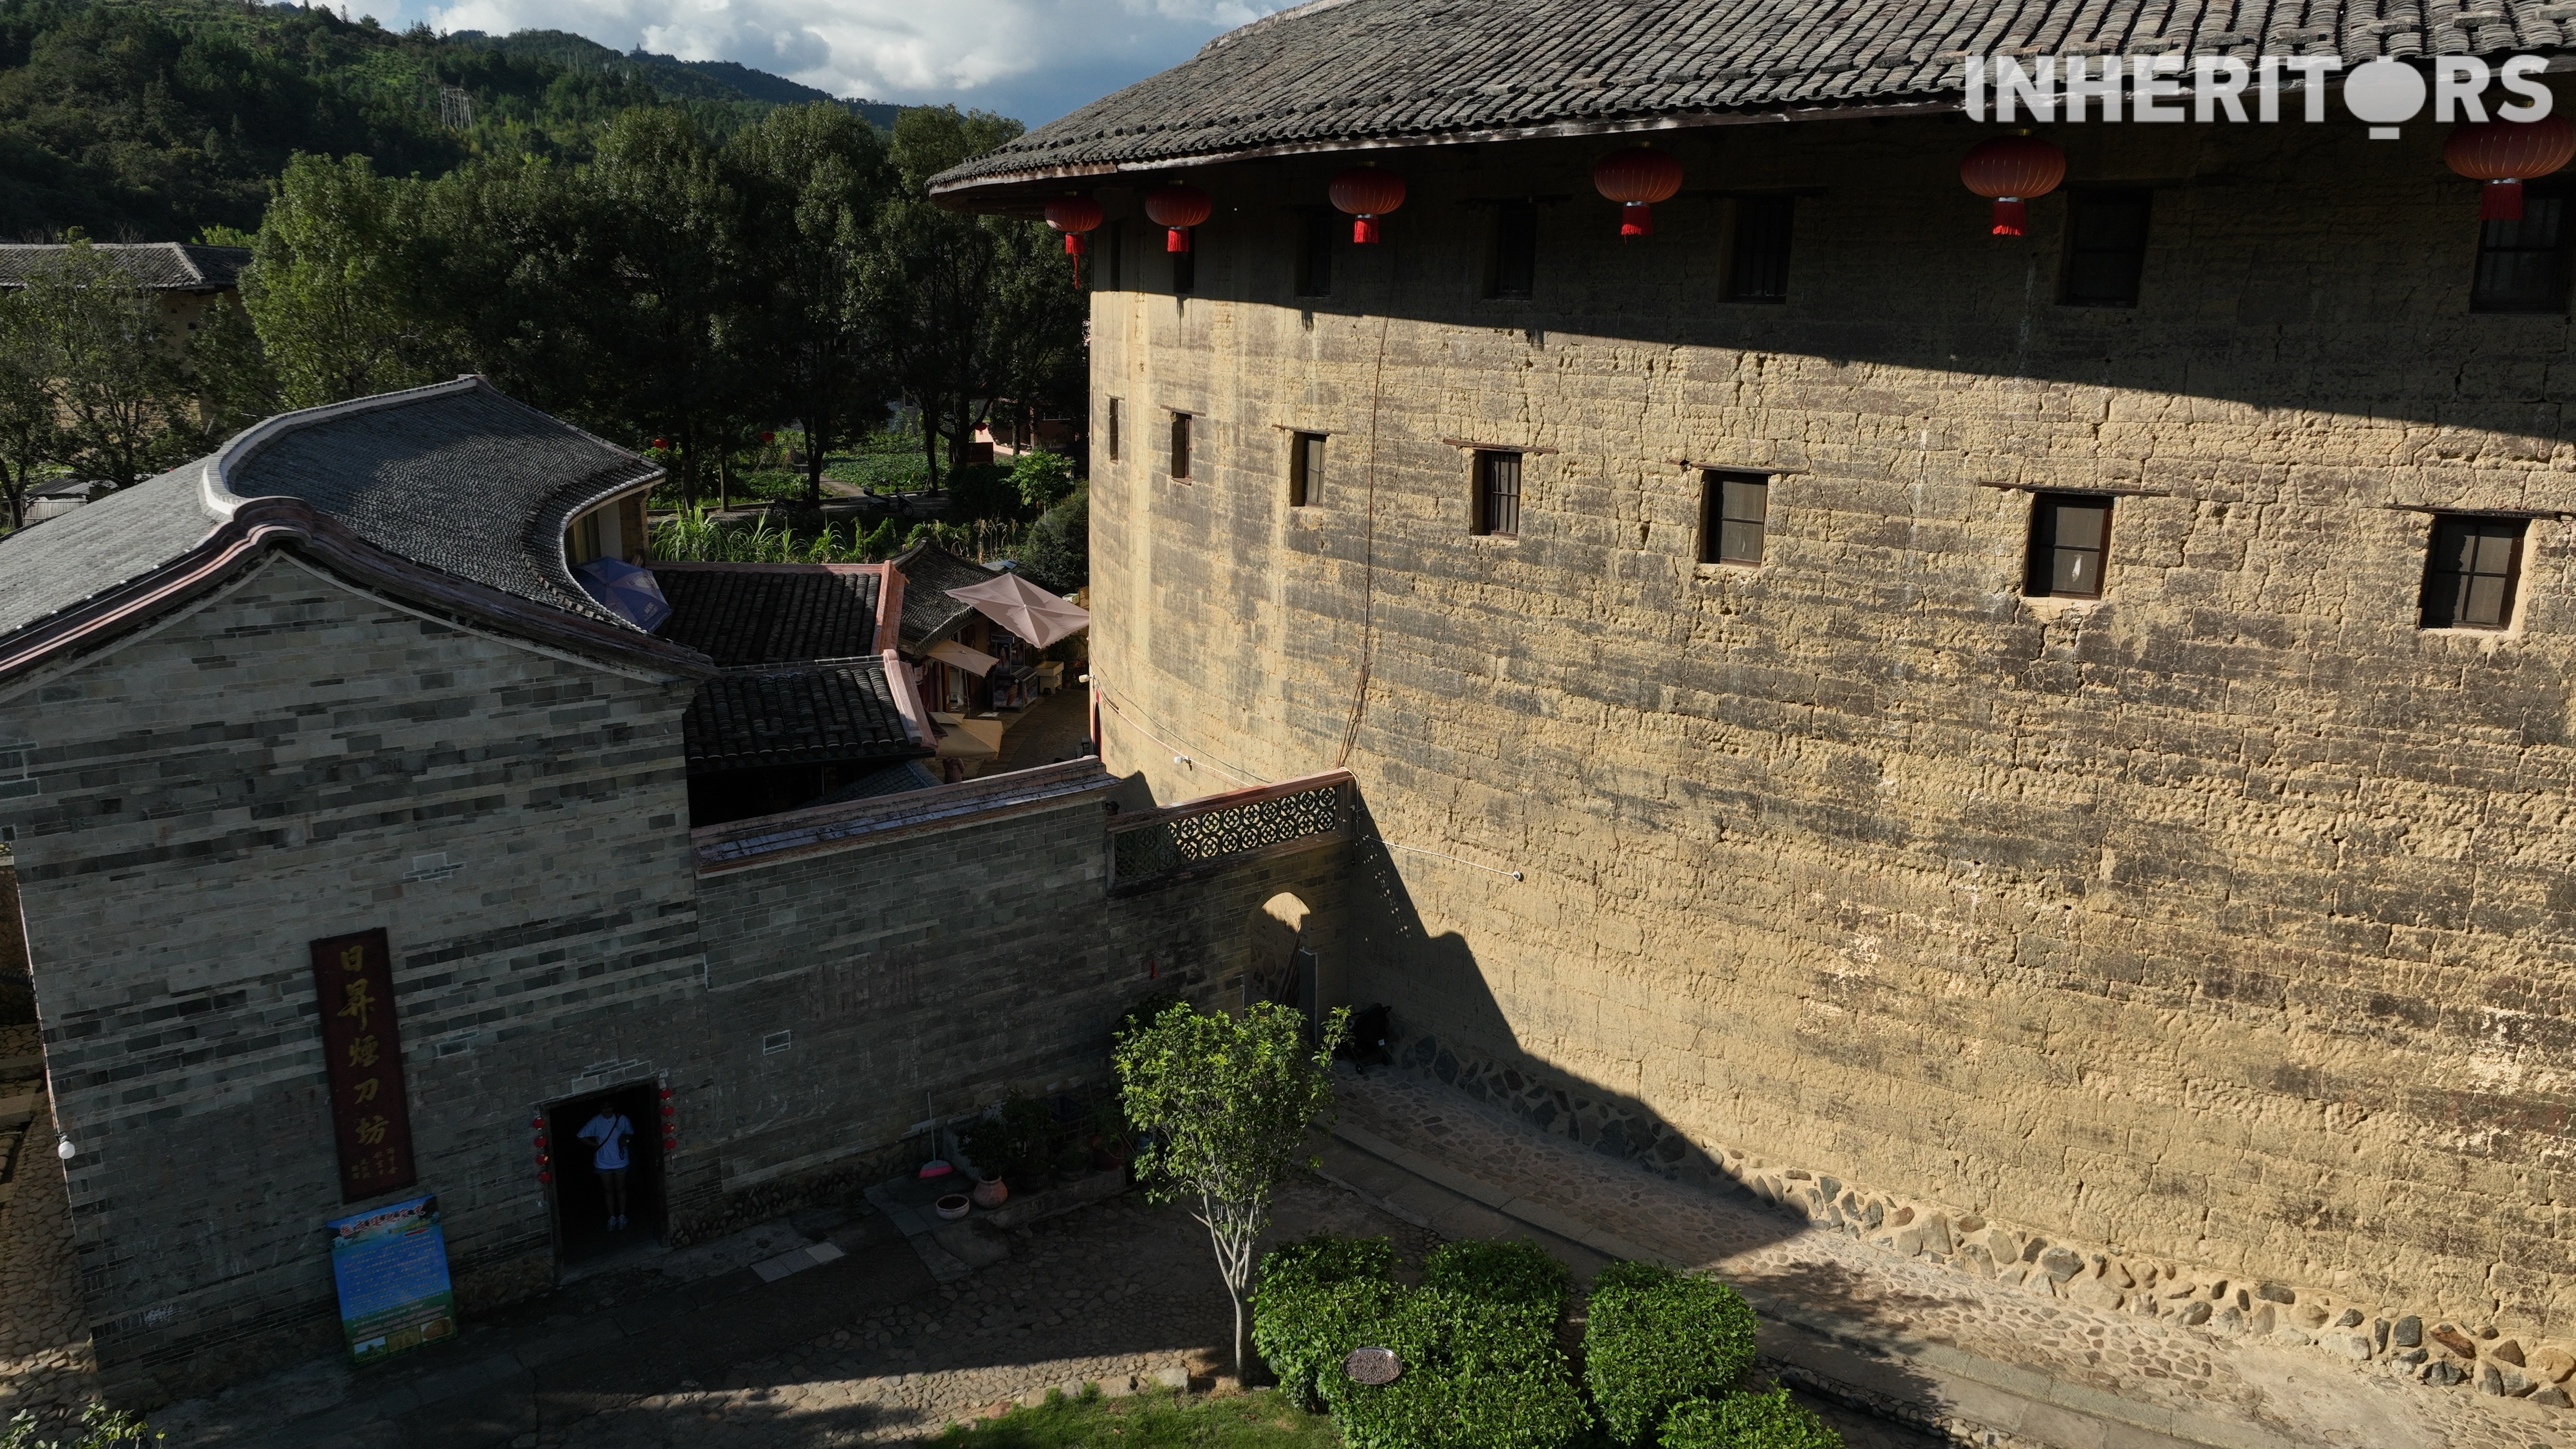 Rocks form the foundations of tulou buildings. /CGTN